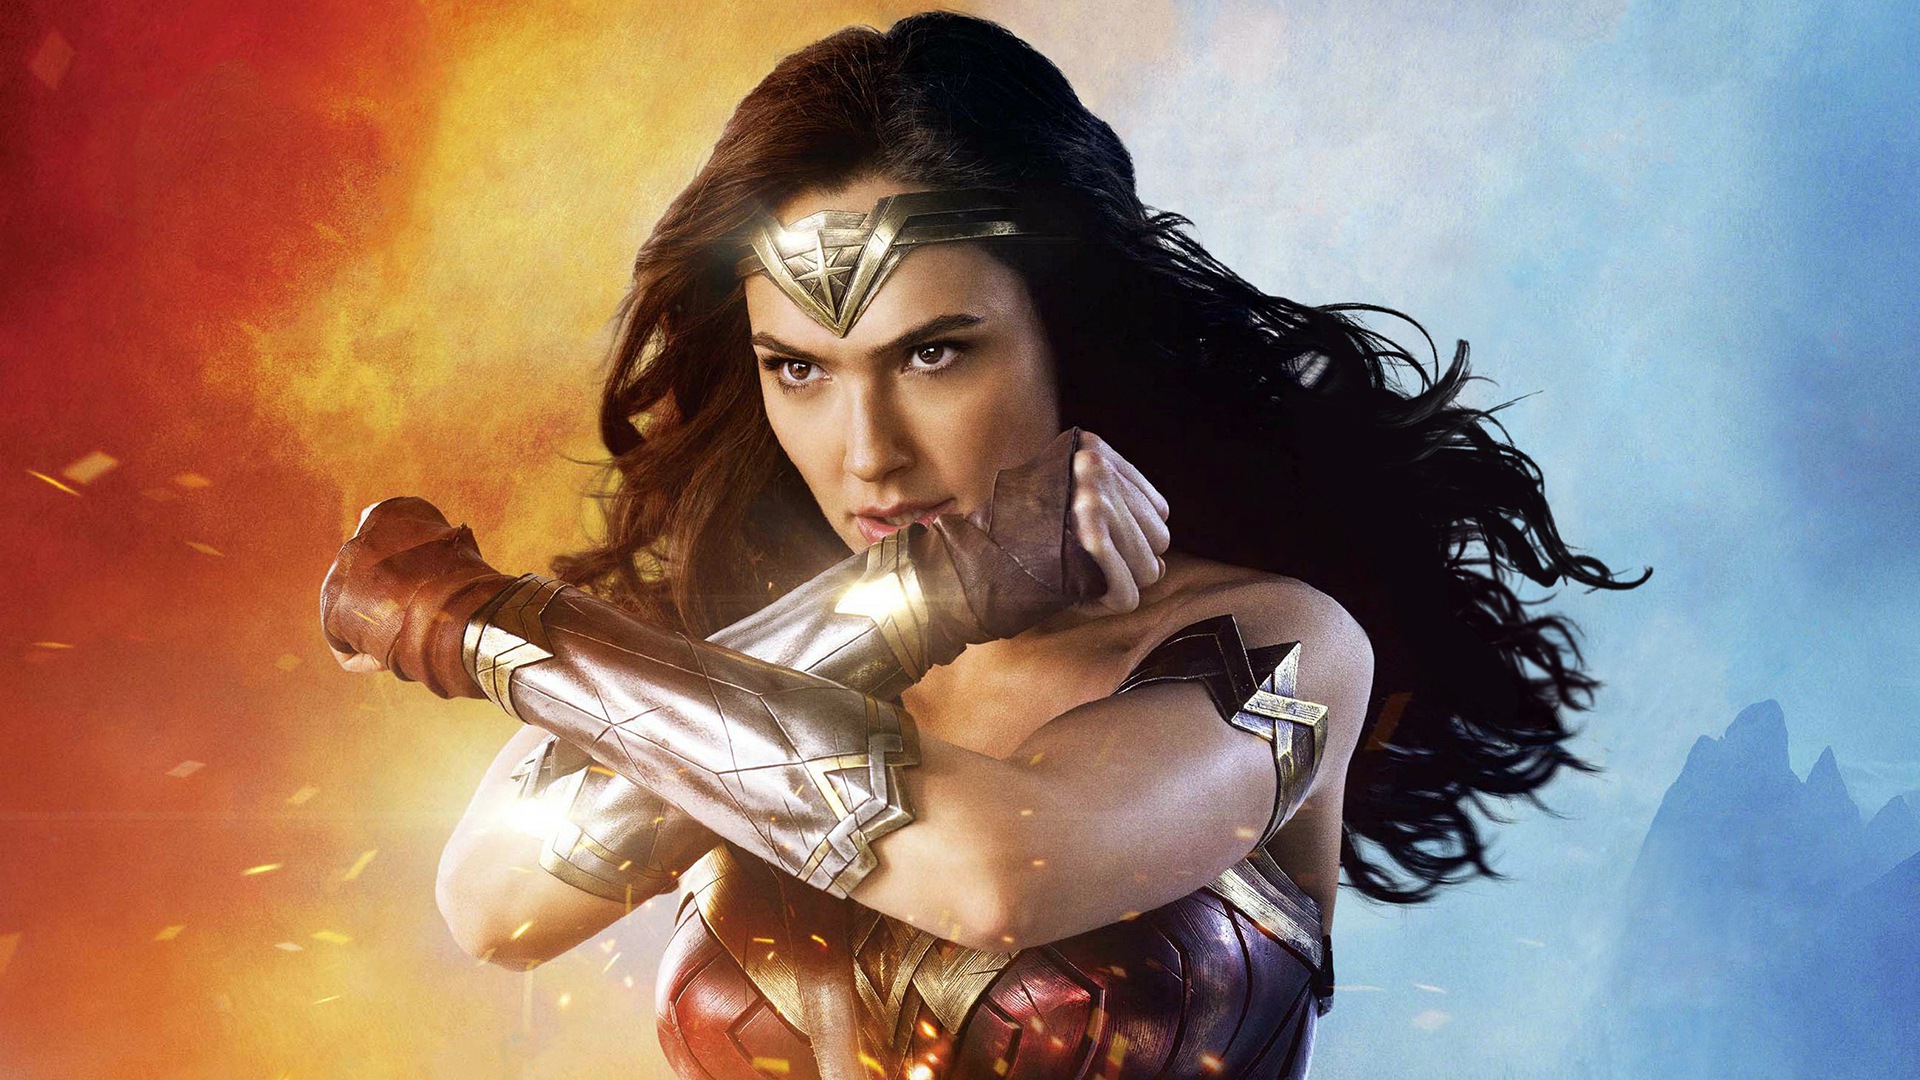 Wonder Woman crosses her arms to form her iconic pose in a Wonder Woman 1984 promotional image